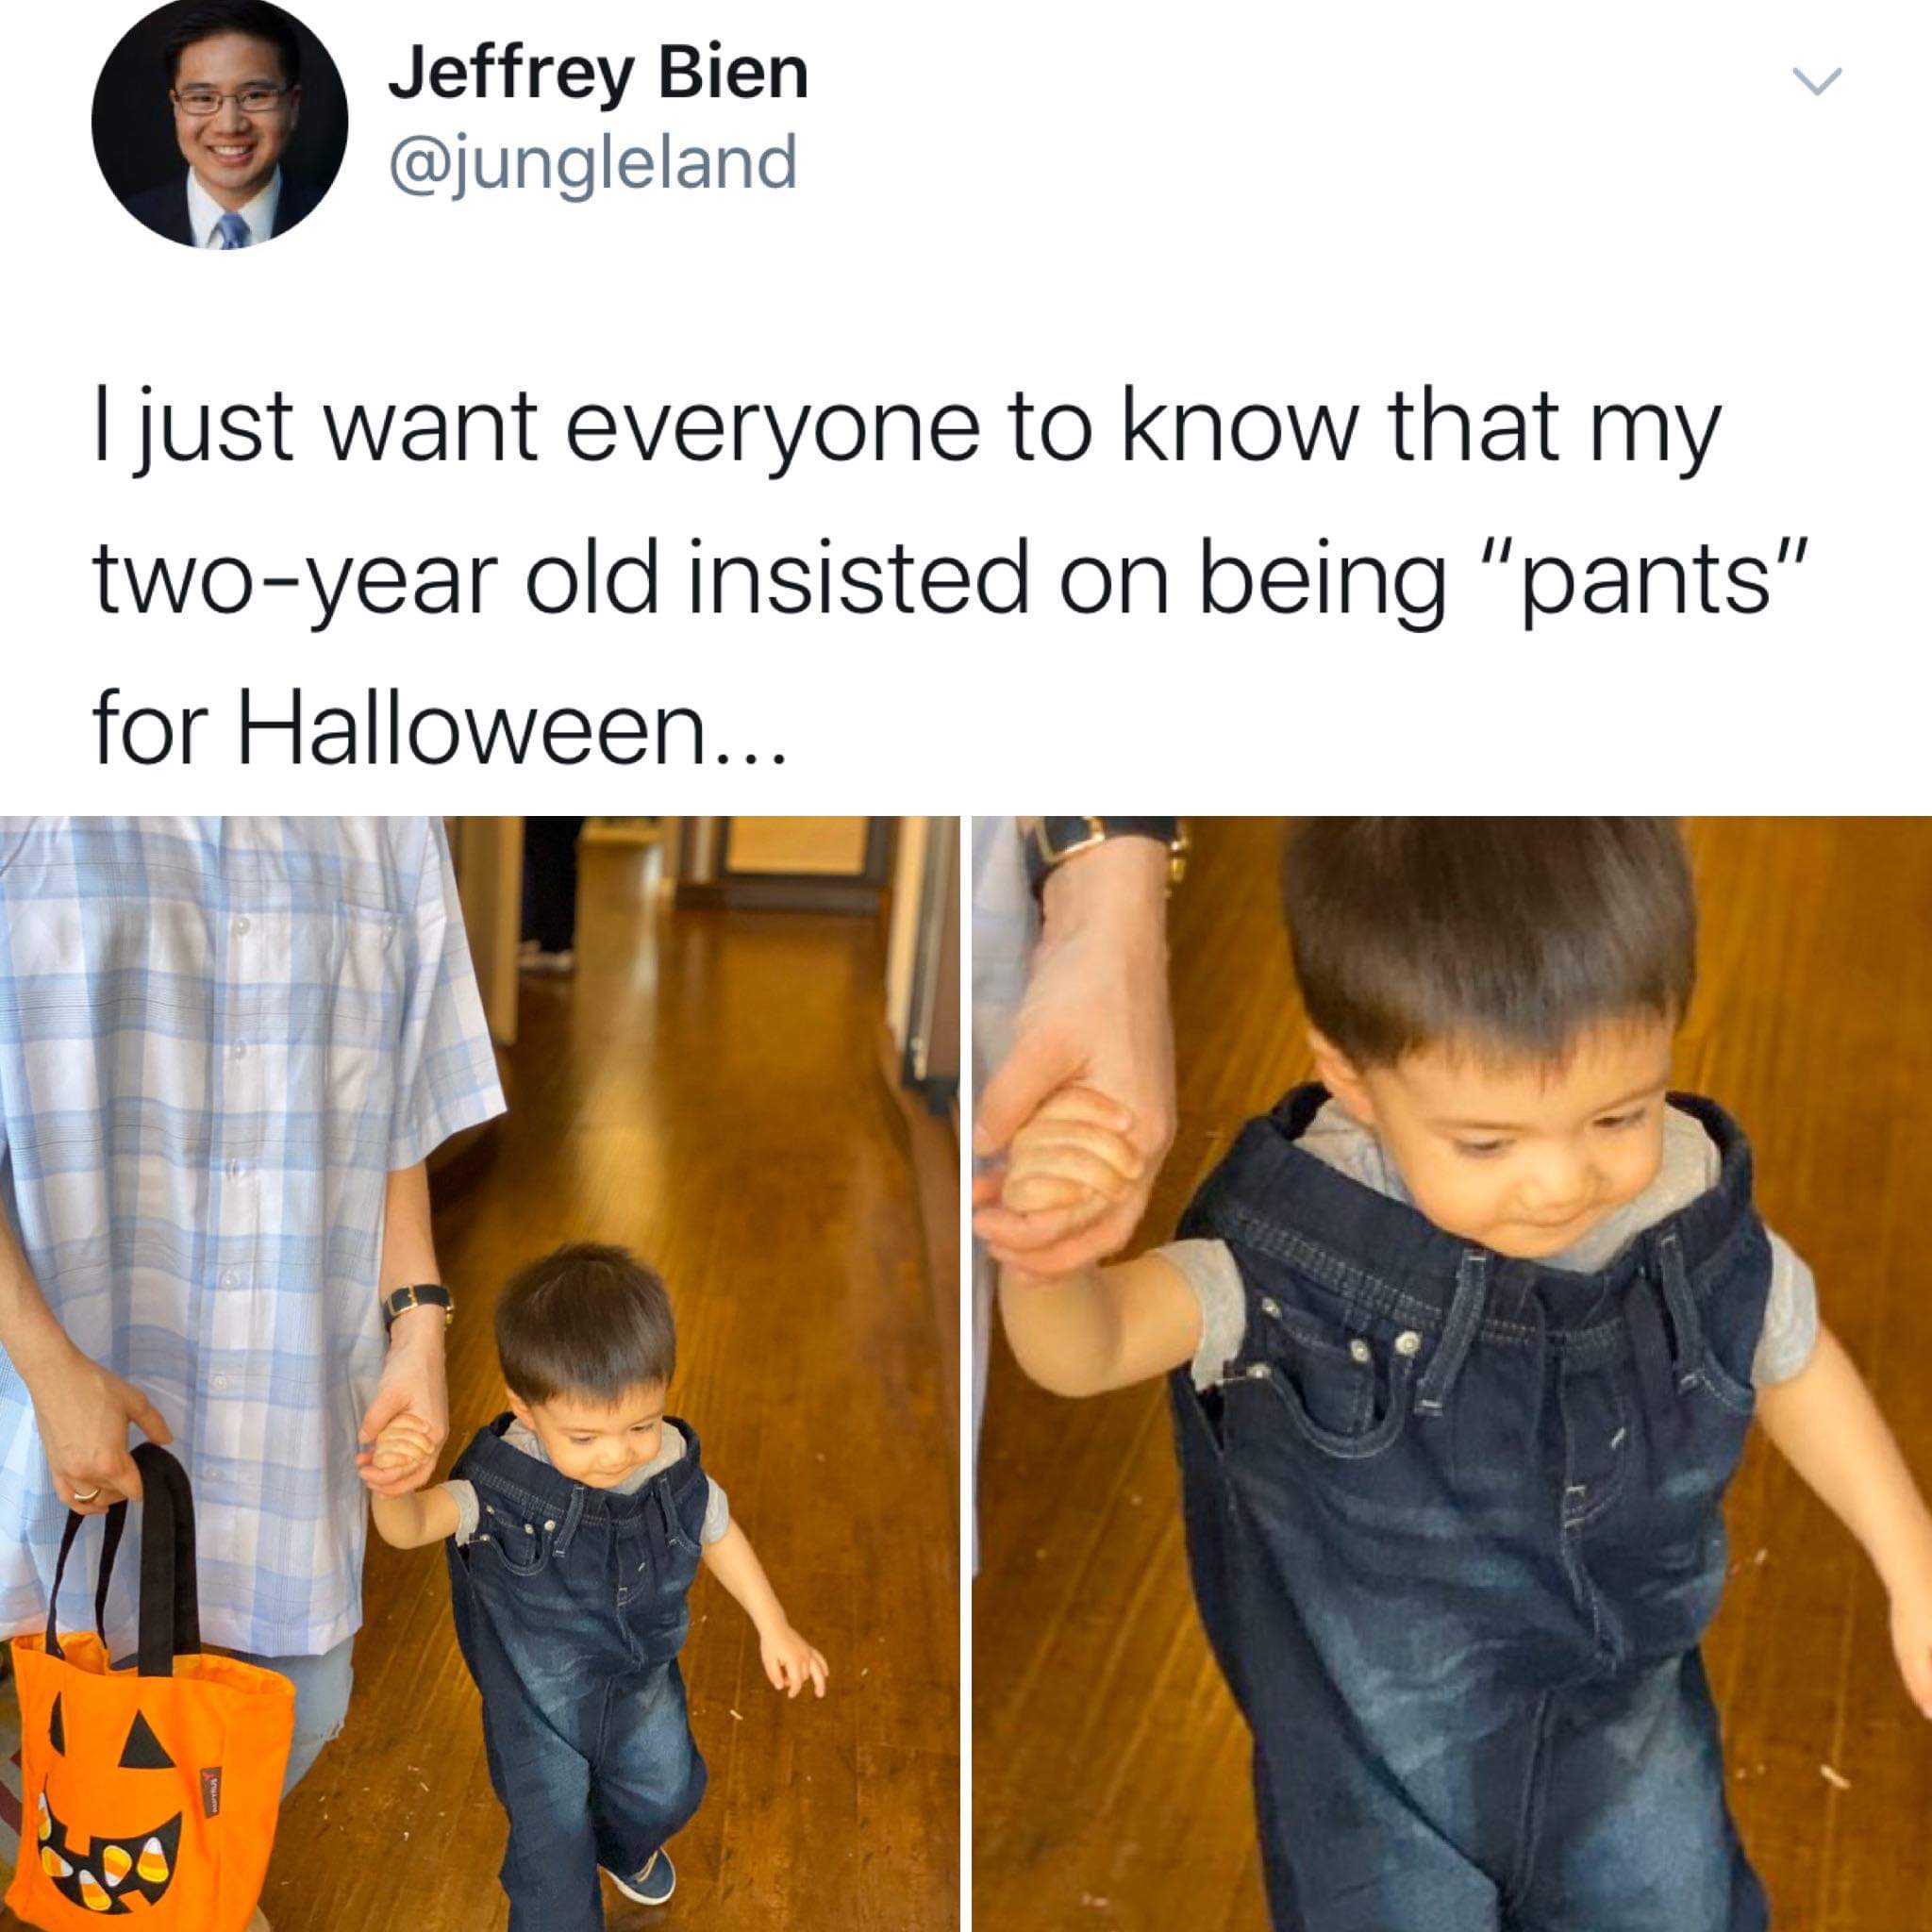 2 year old insisted on being pants - Jeffrey Bien I just want everyone to know that my twoyear old insisted on being "pants" for Halloween...